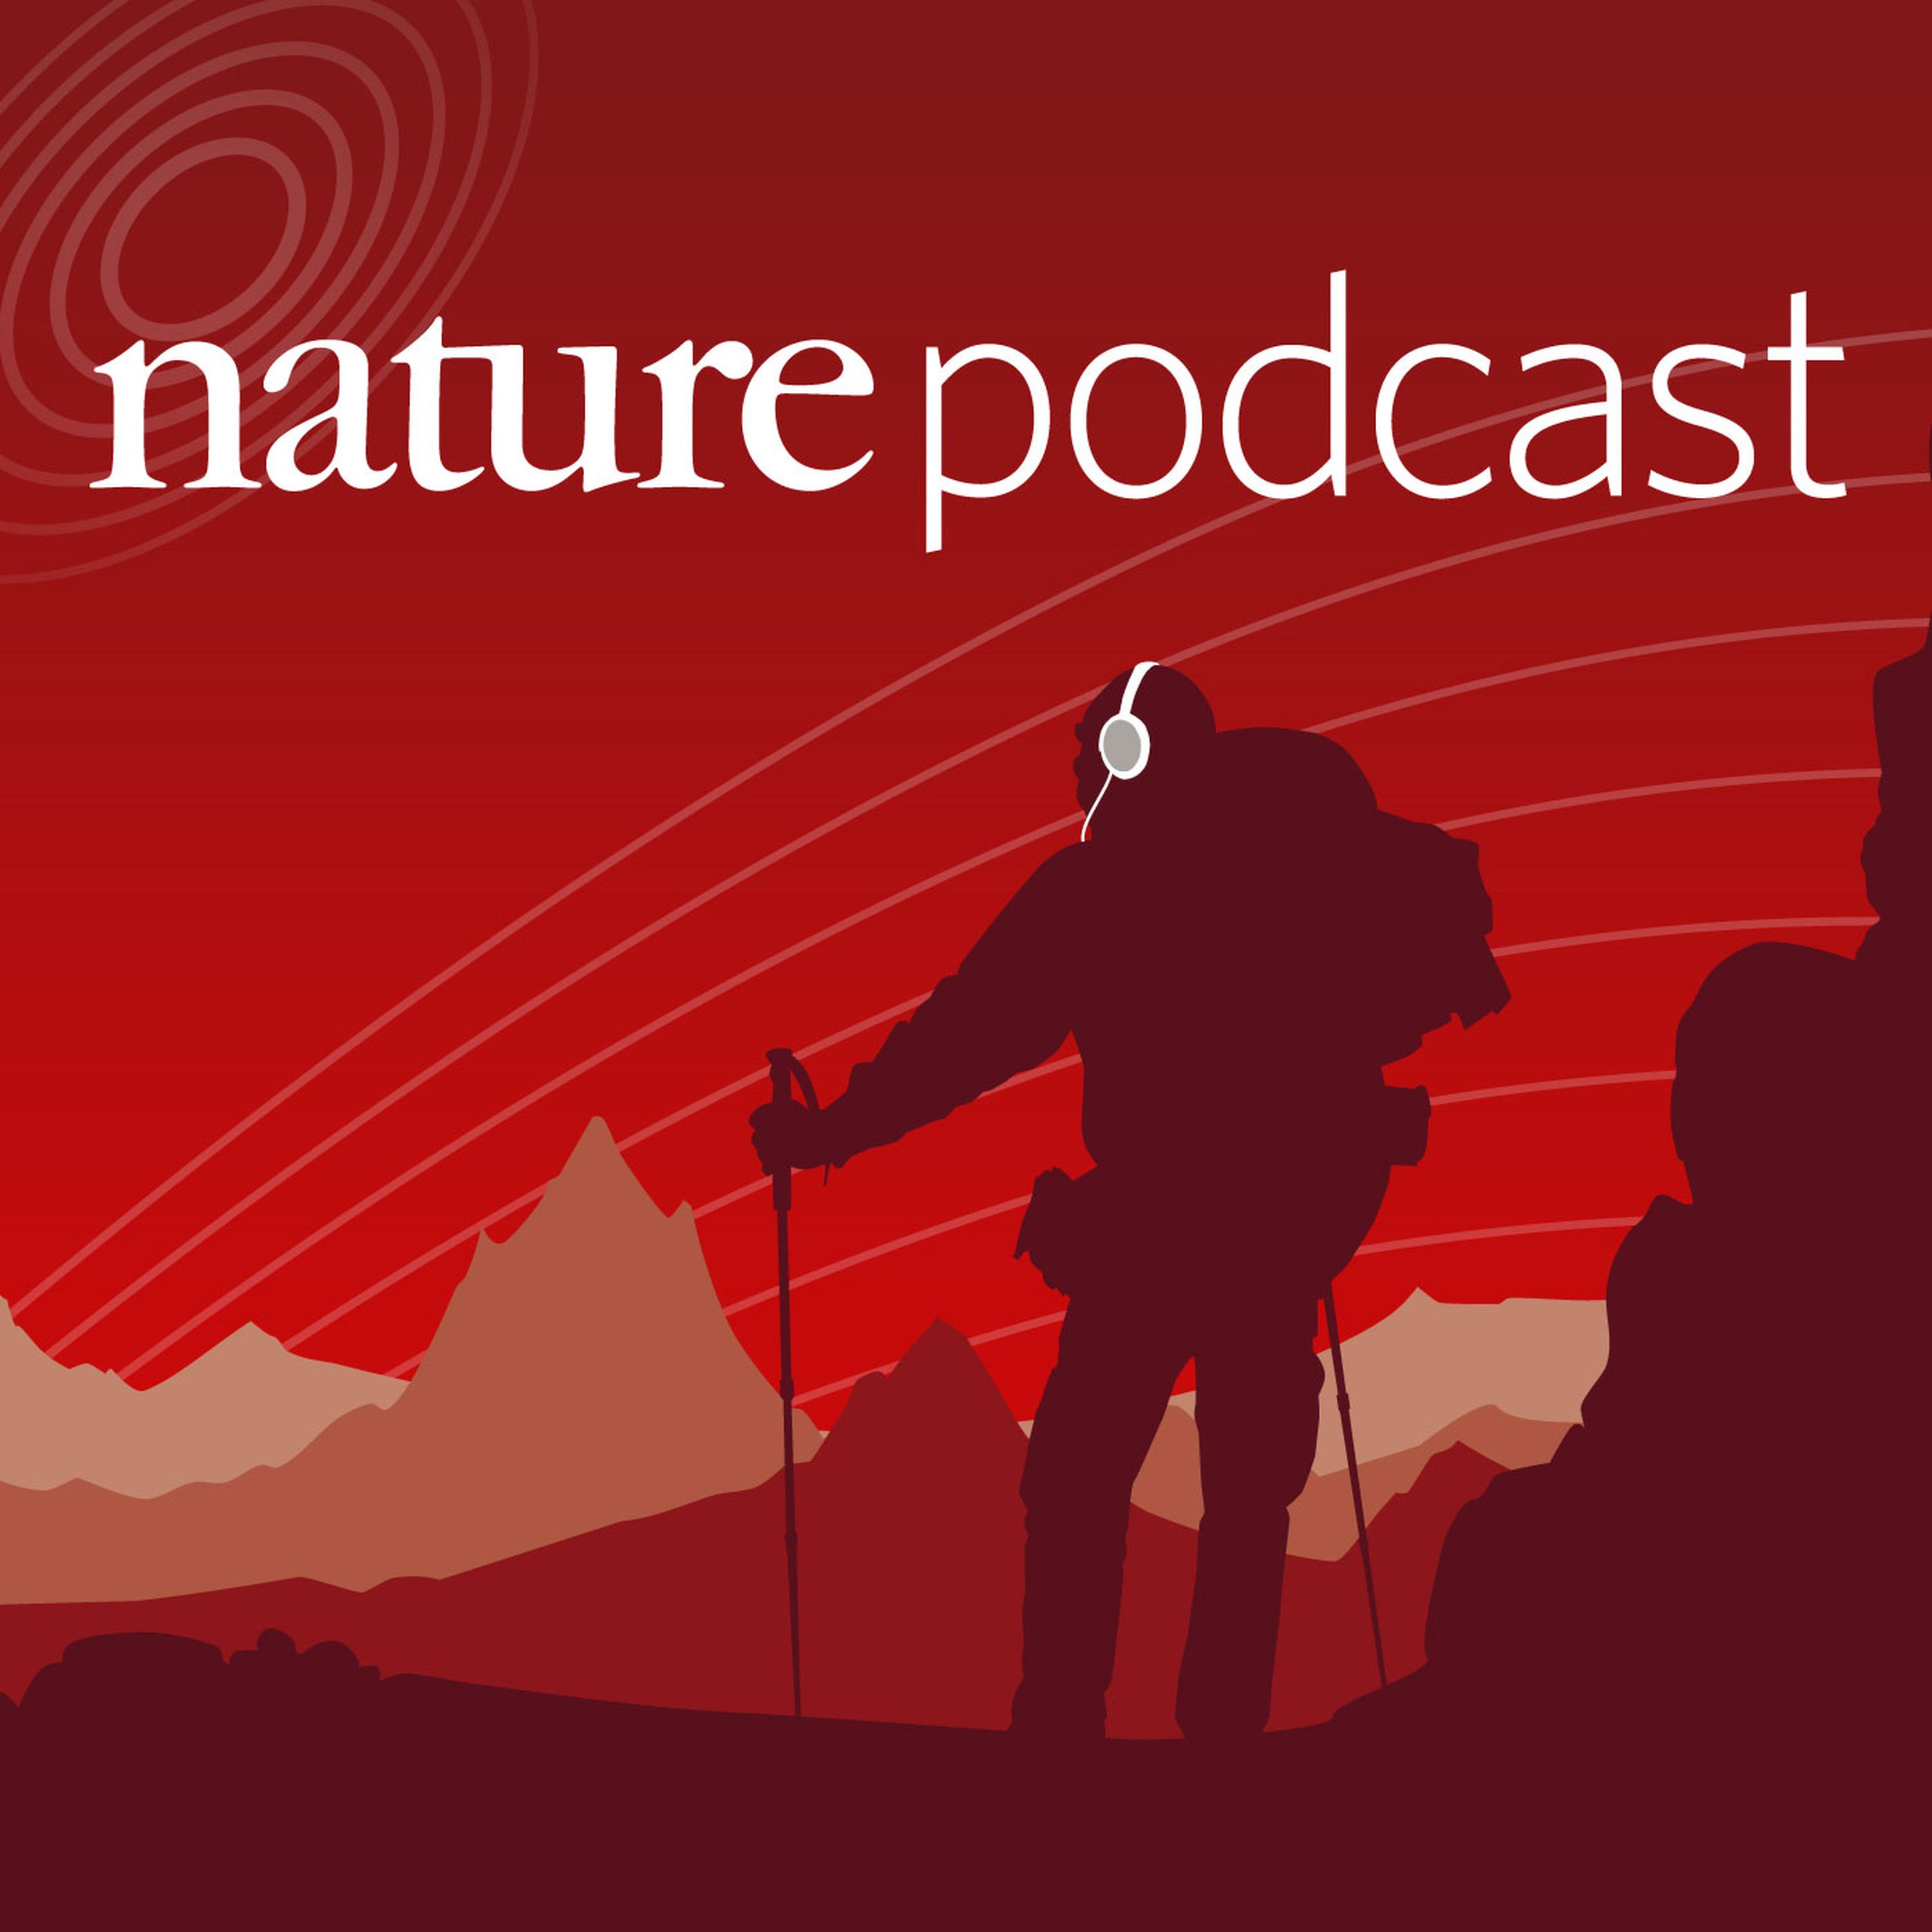 Nature Podcast: 20 August 2015